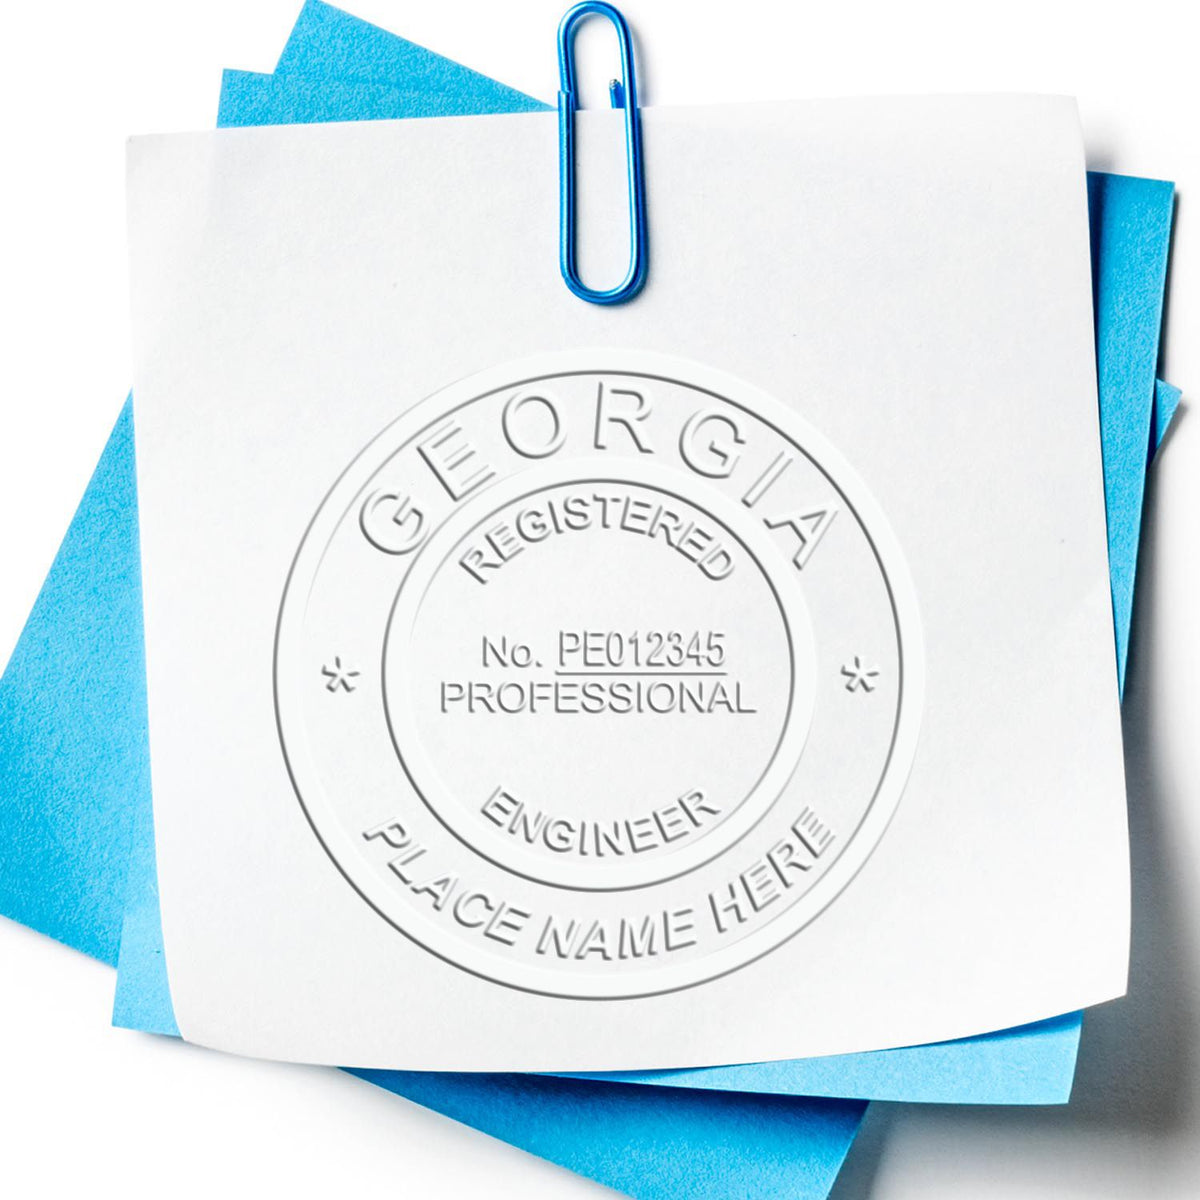 An alternative view of the State of Georgia Extended Long Reach Engineer Seal stamped on a sheet of paper showing the image in use